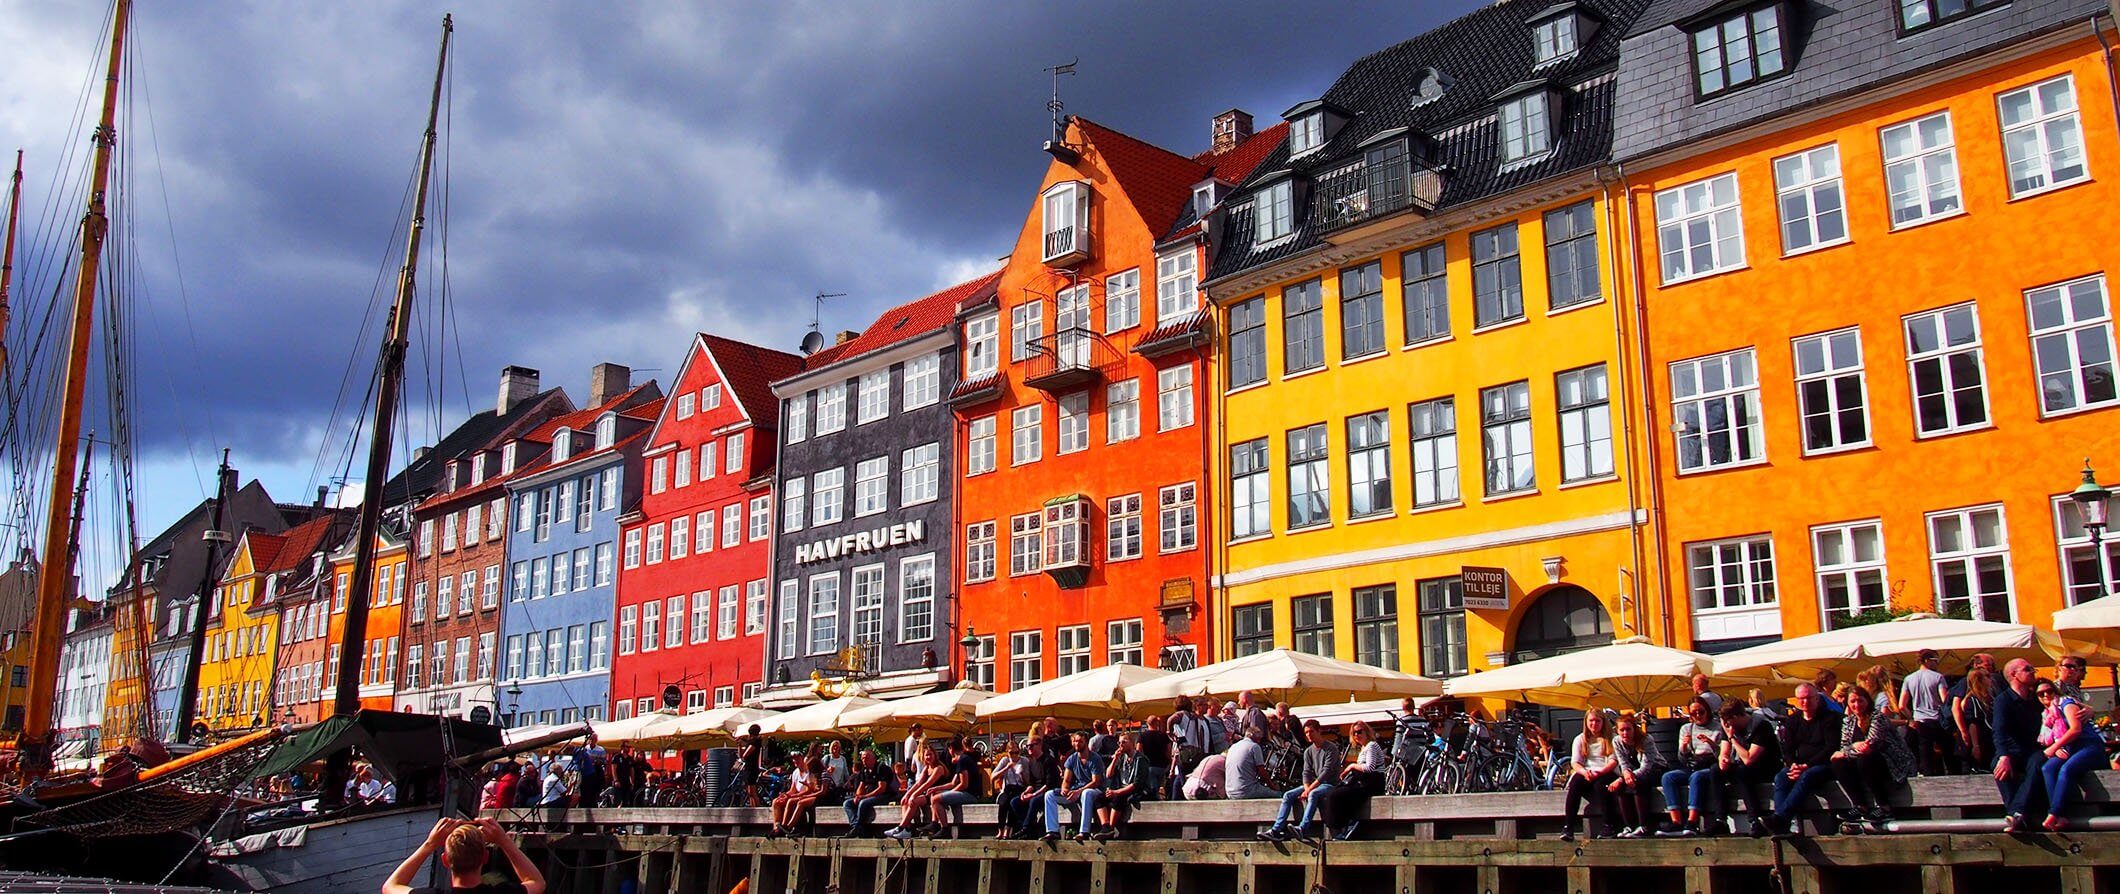 colorful houses in Copenhagen in a street next to a river. People drinking in pubs sitting outside next to the river